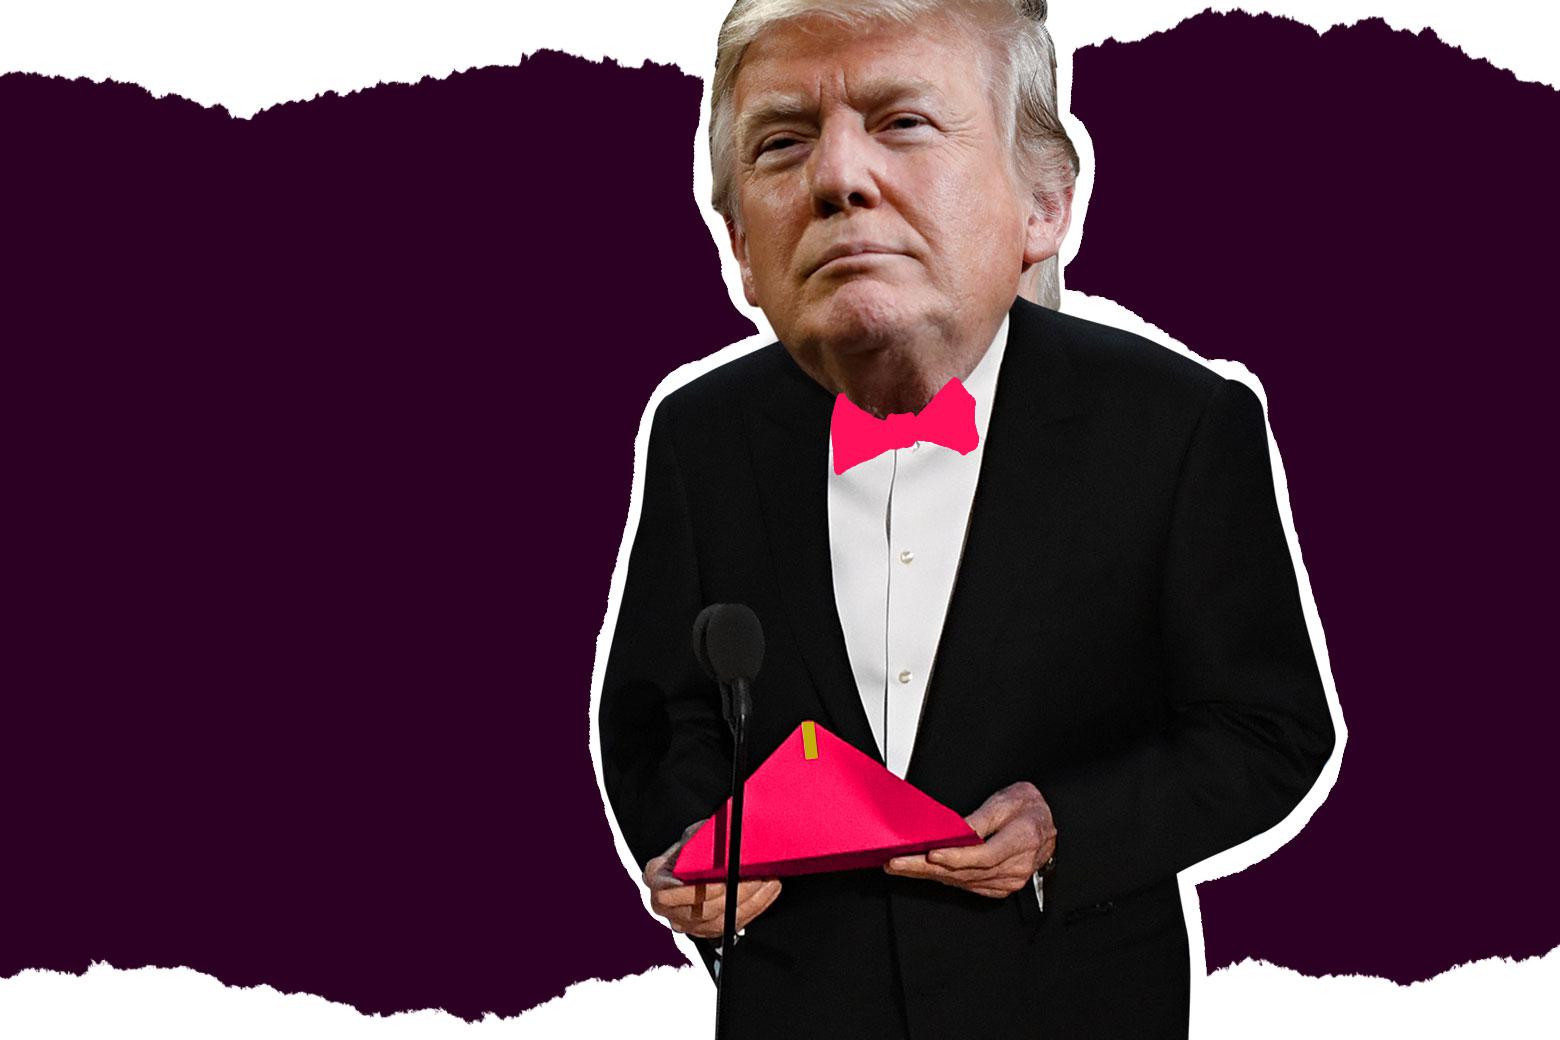 An illustration of Donald Trump wearing a bow tie and reading an award from an envelope.